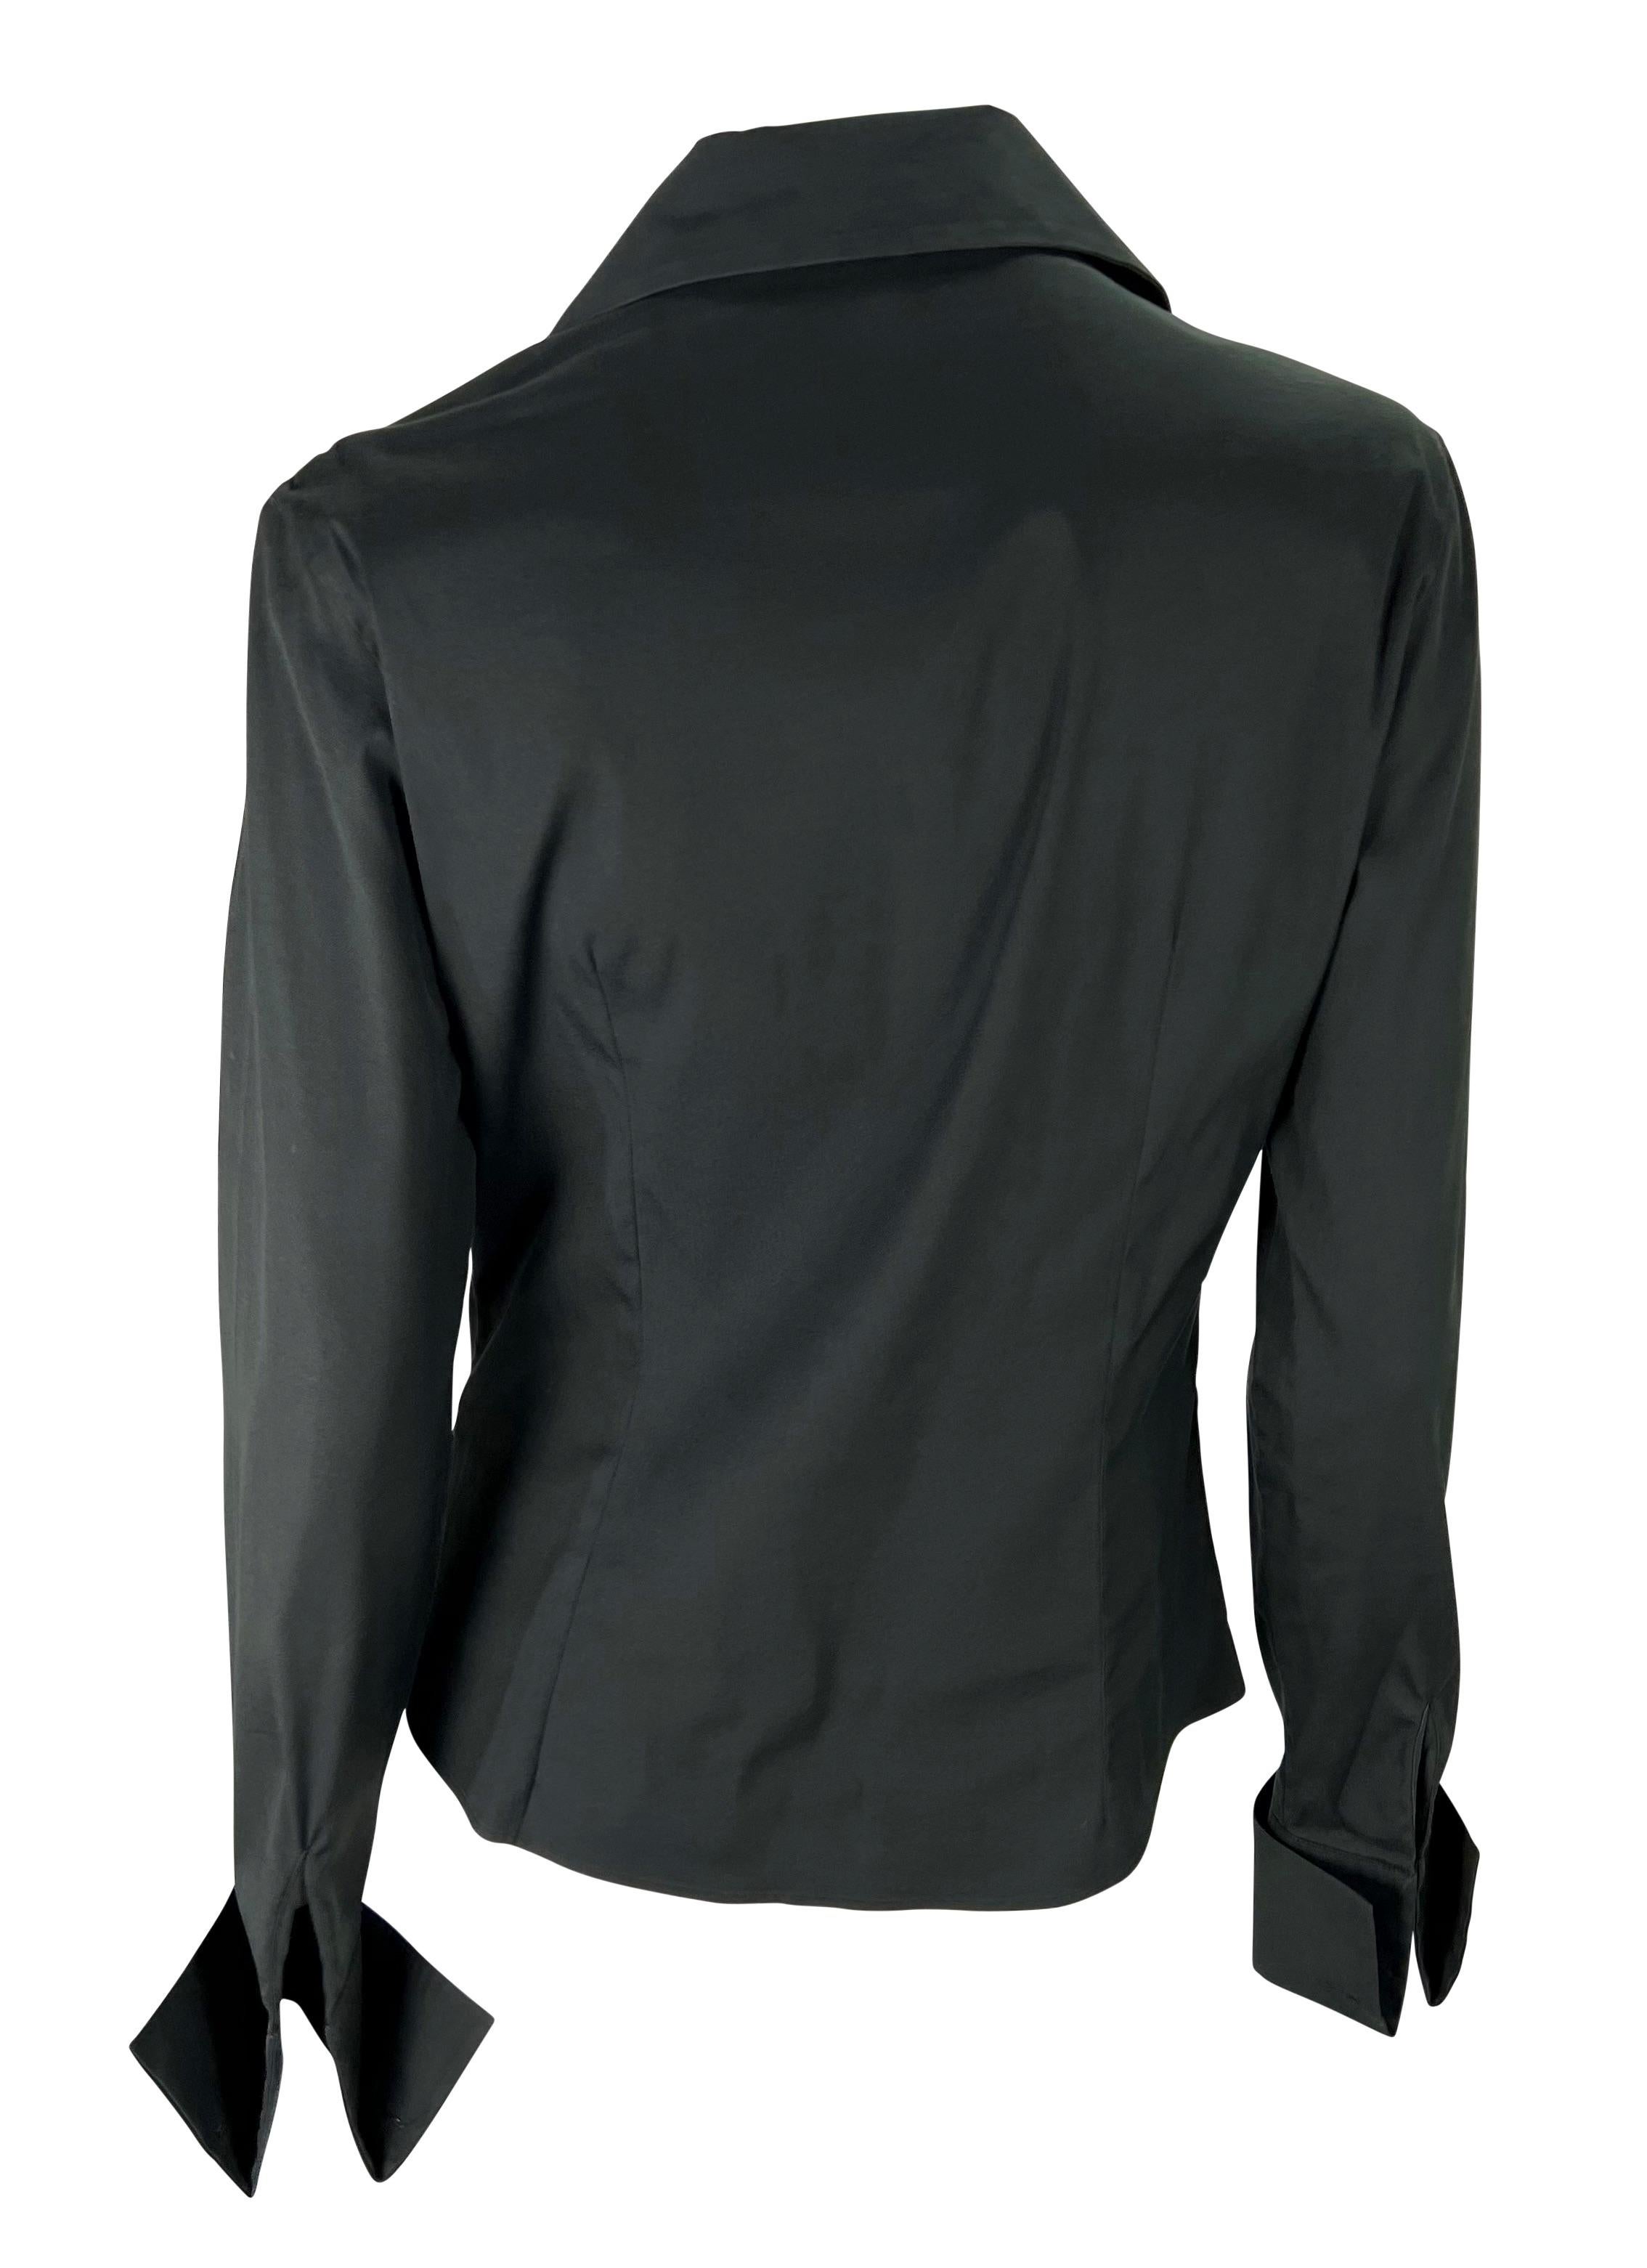 Women's 2000 Gucci by Tom Ford Black Wrap French Cuff Plunging Stretch Cotton Blouse Y2K